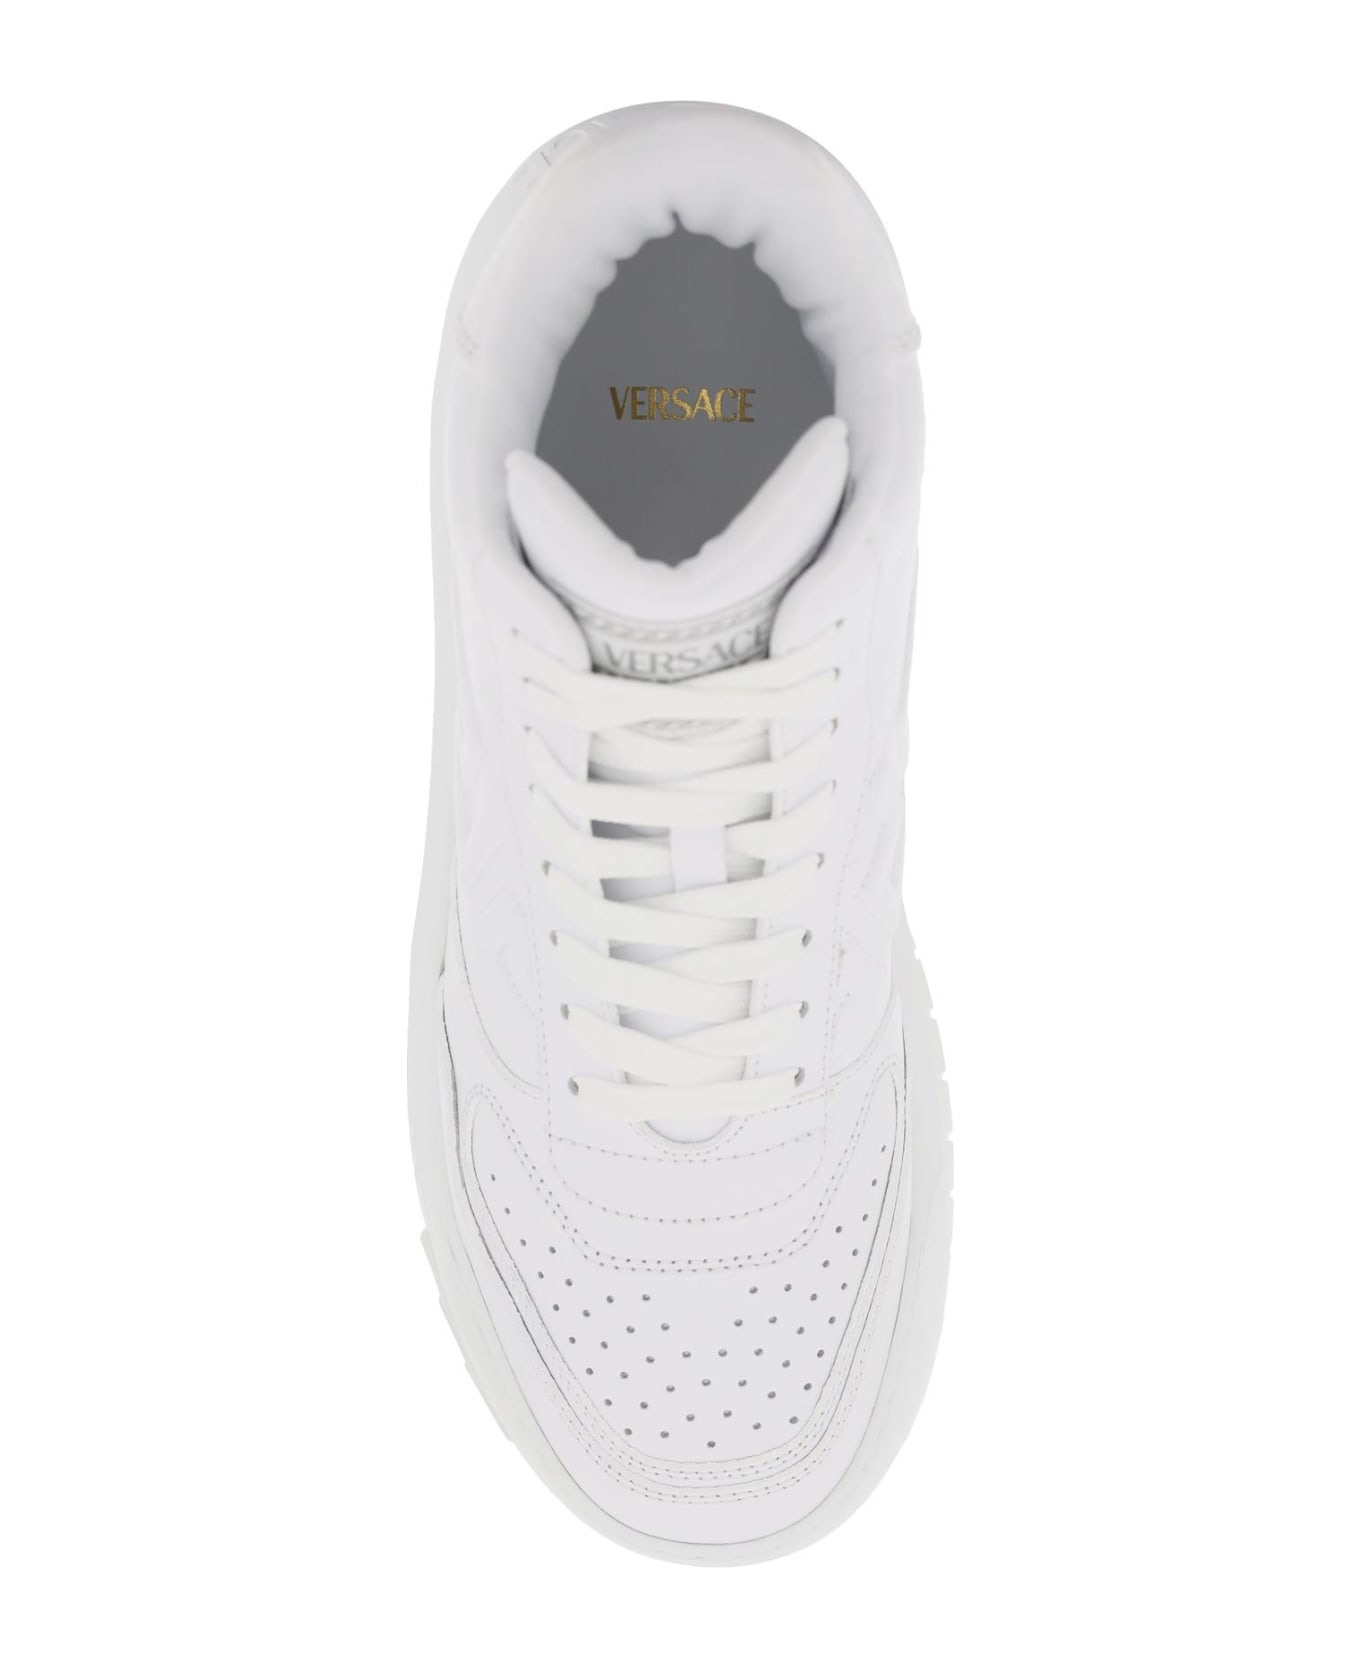 Versace 'greca Odissea' High Sneakers In White Calf Leather - OPTICAL WHITE (White) スニーカー